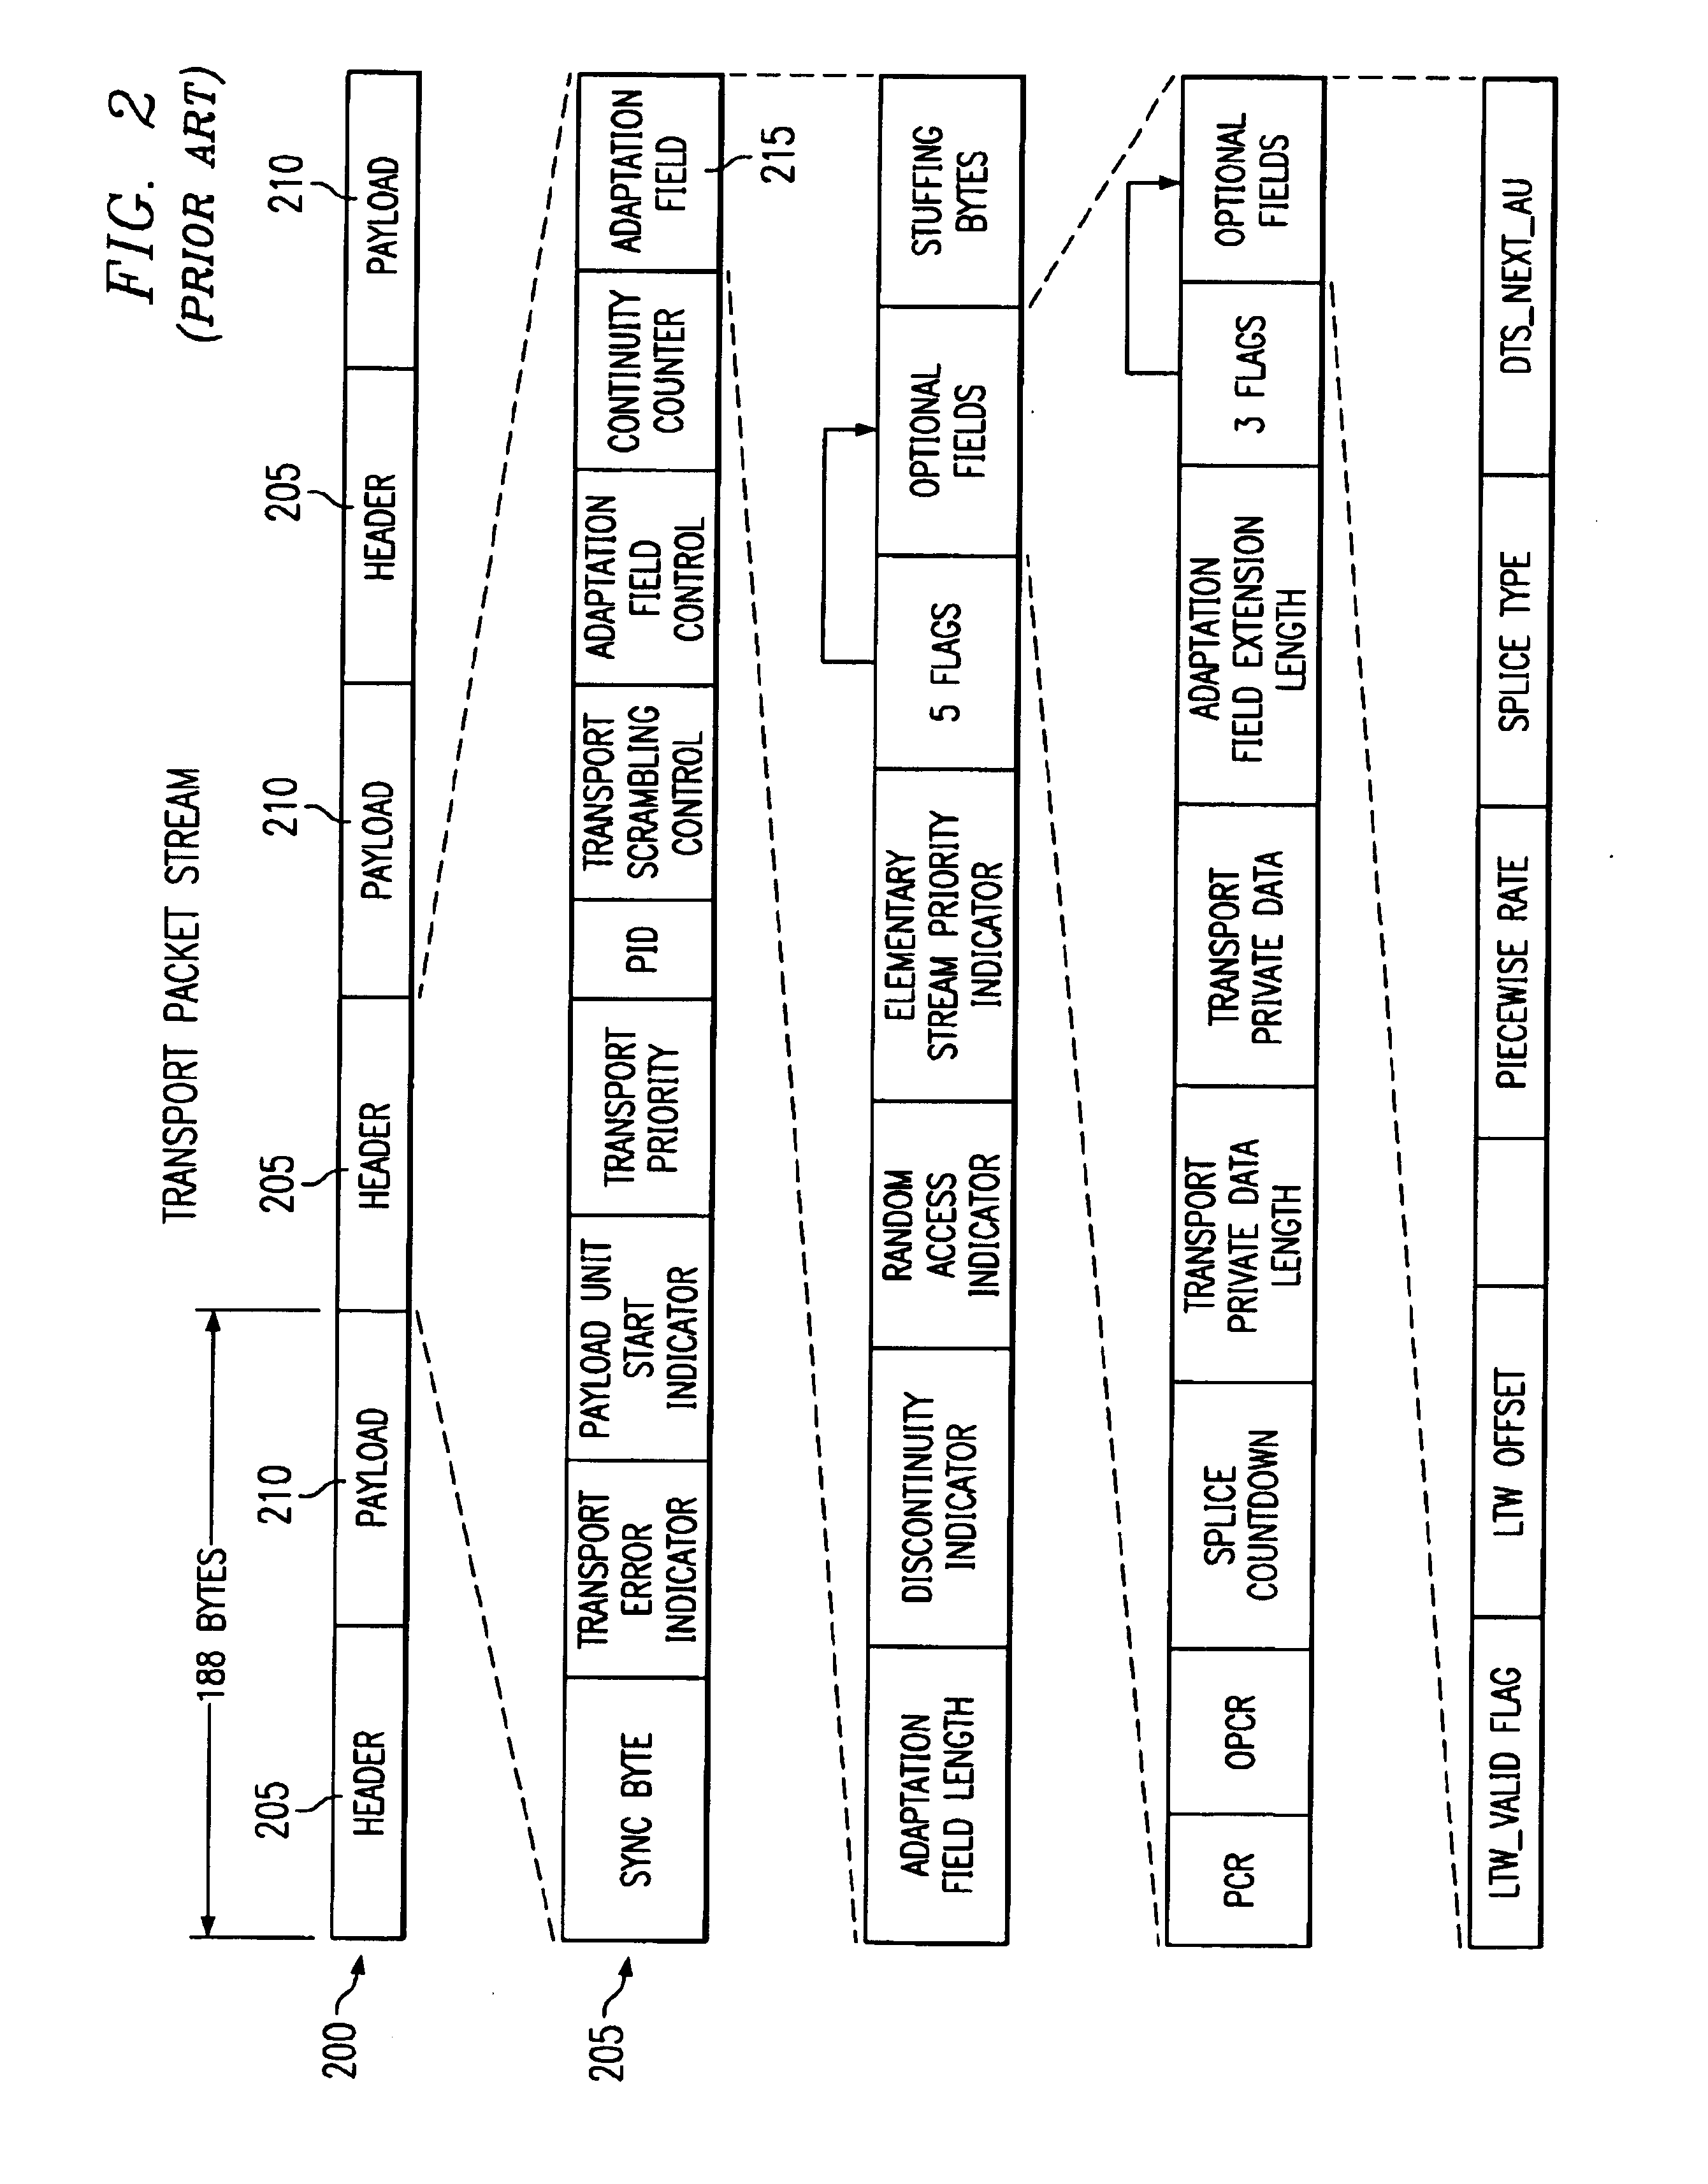 Apparatus and method for synchronizing video and audio MPEG streams in a video playback device